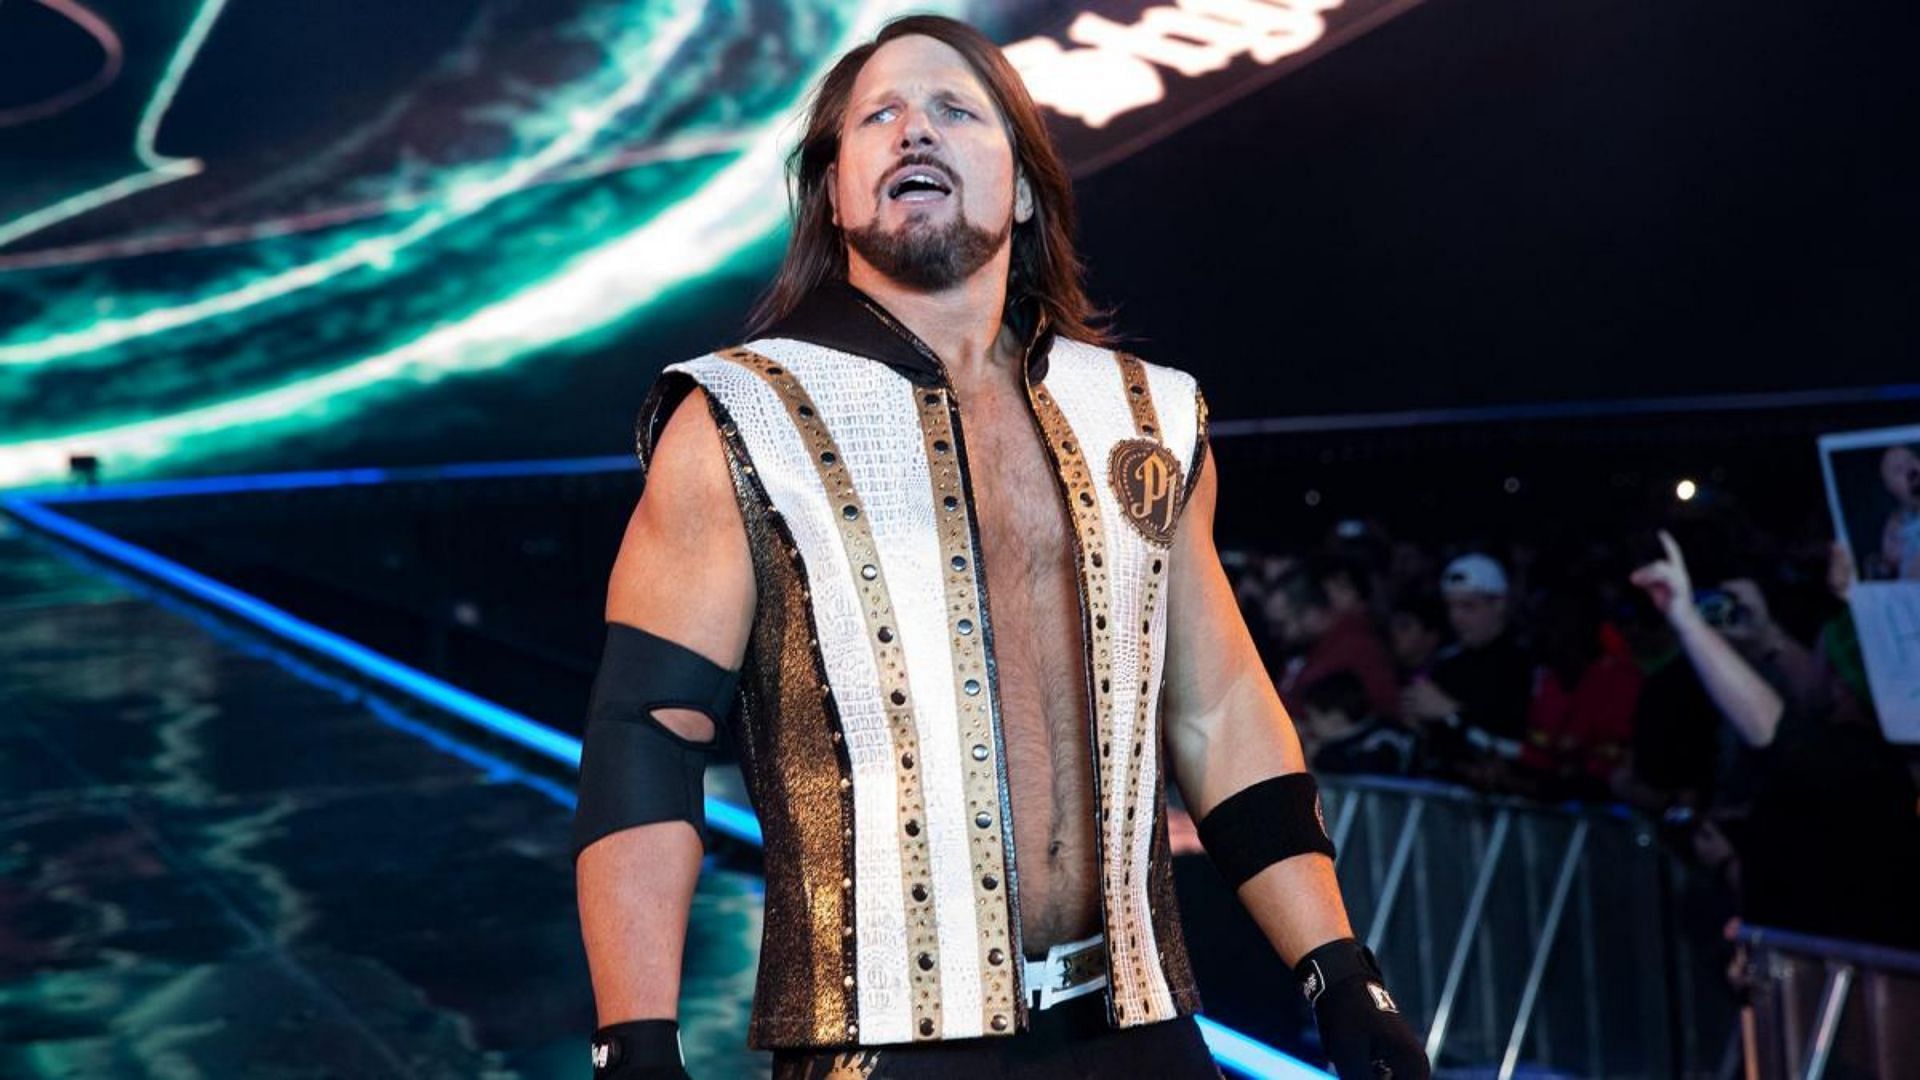 AJ Styles never watched wrestling as a child